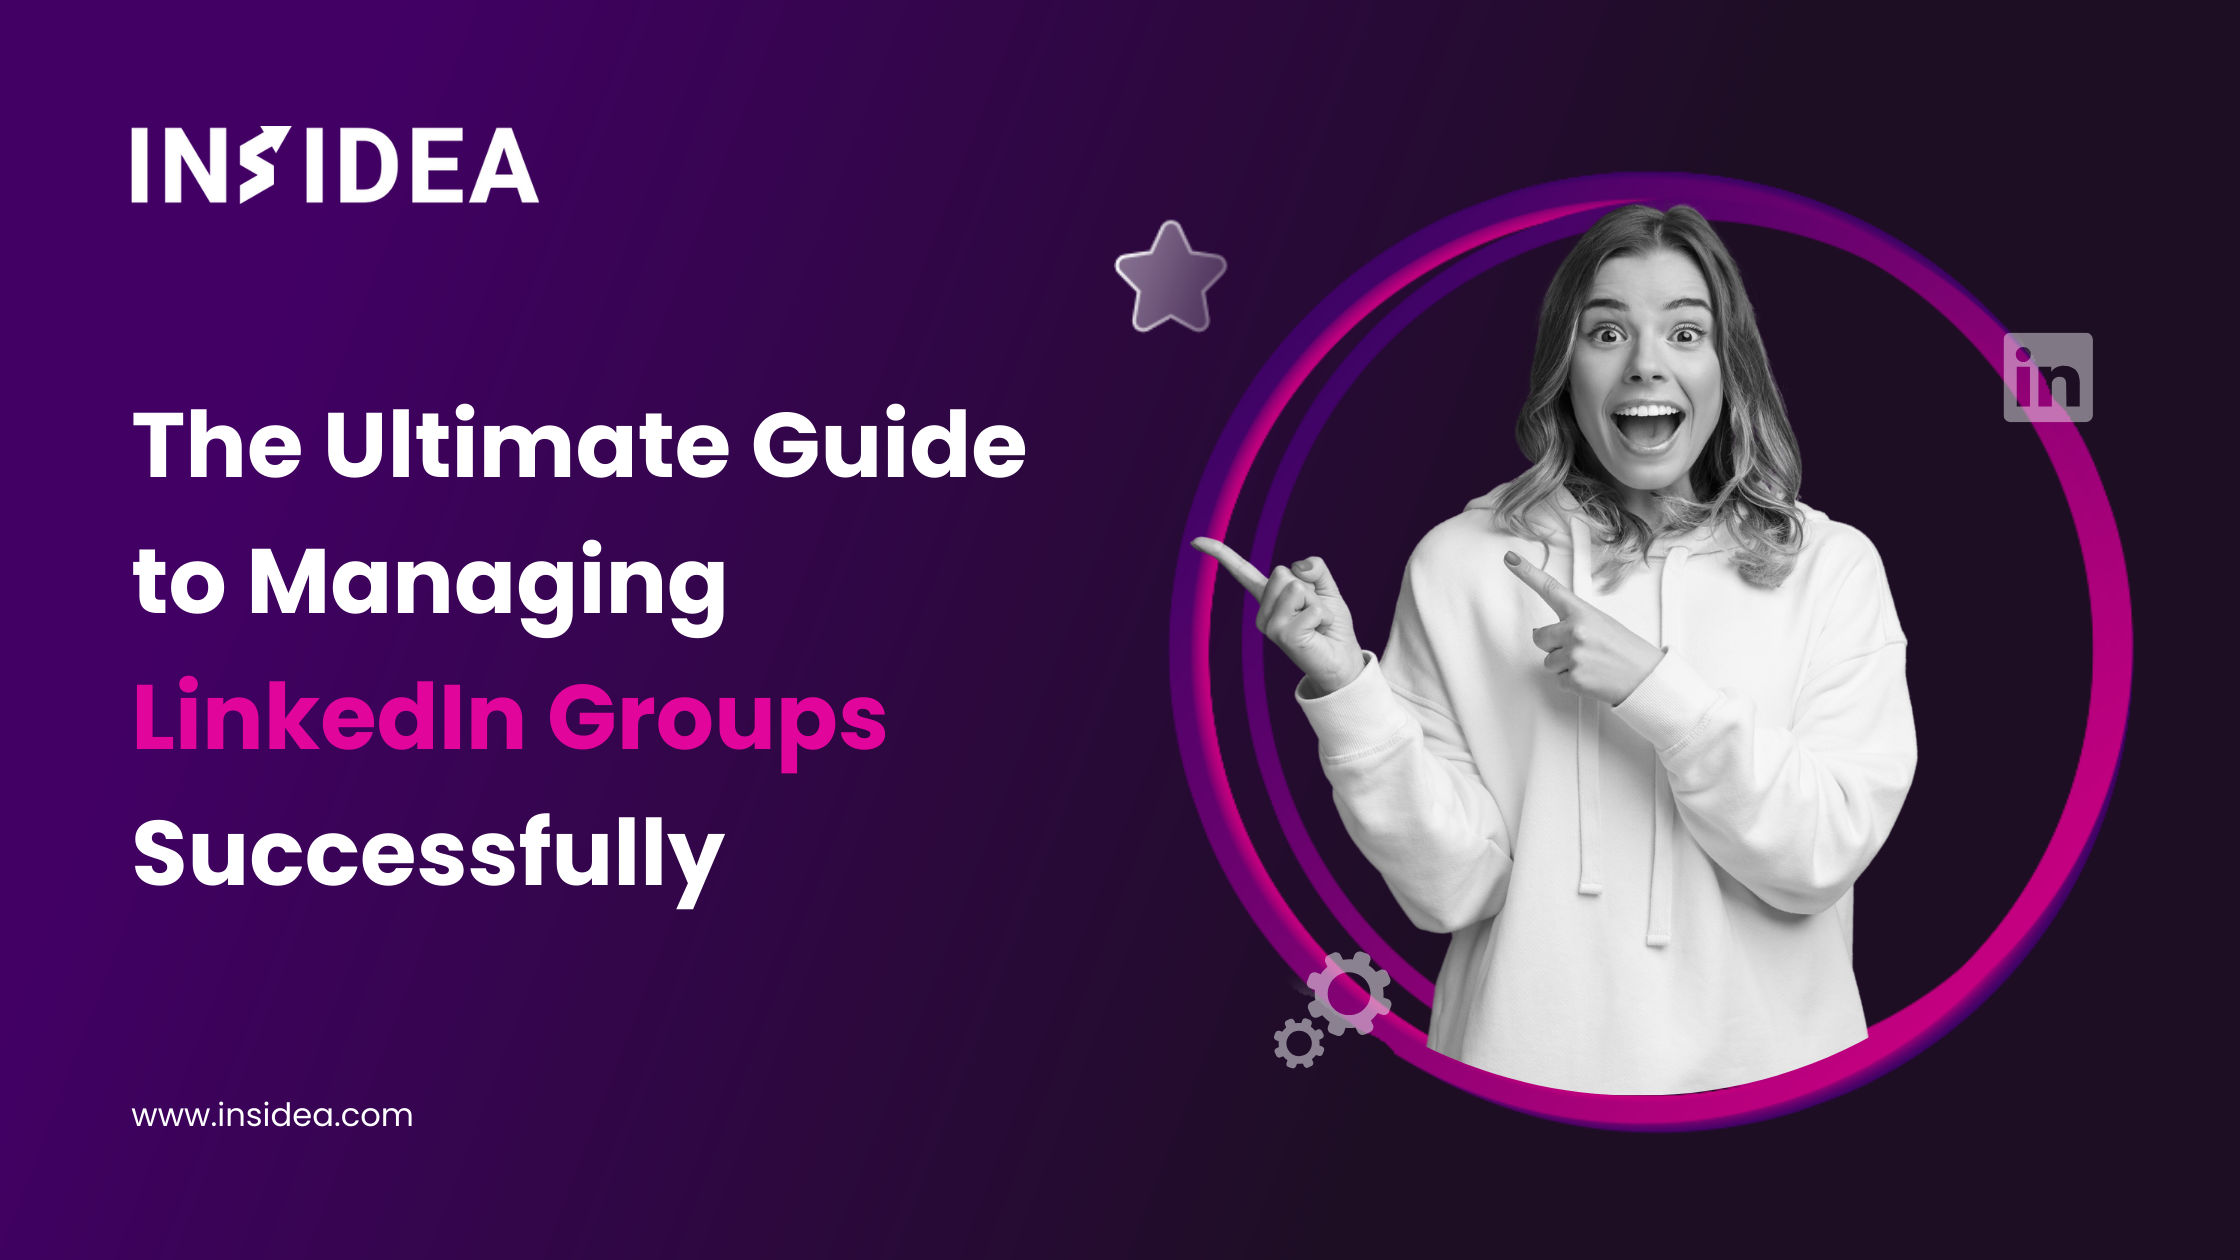 The Ultimate Guide to Managing LinkedIn Groups Successfully